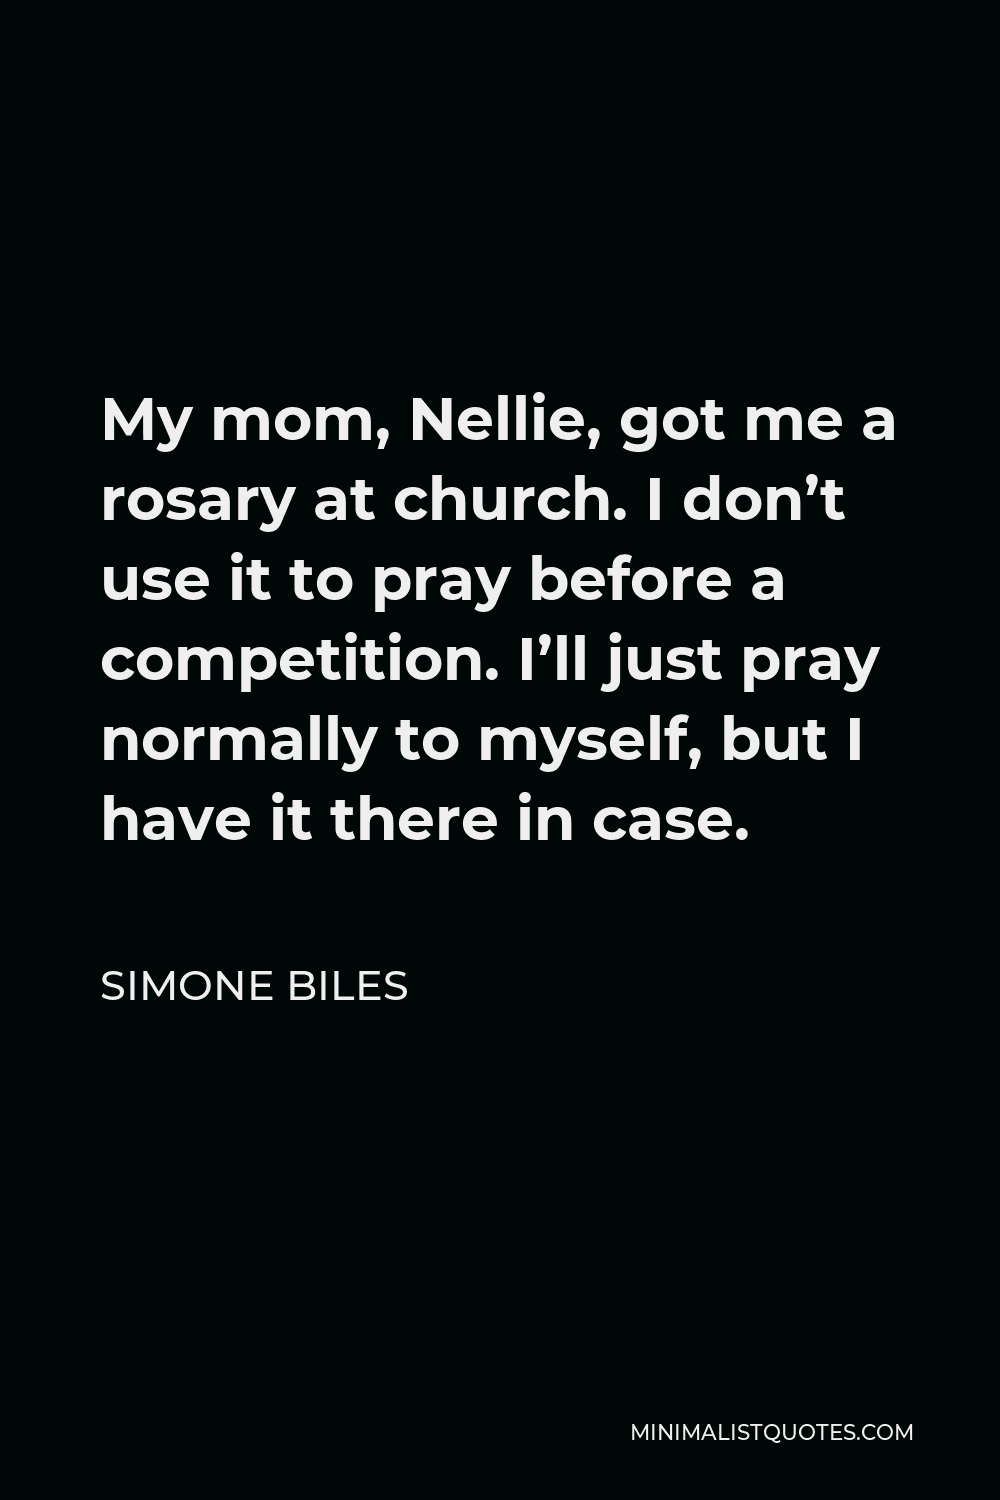 Simone Biles Quote - My mom, Nellie, got me a rosary at church. I don’t use it to pray before a competition. I’ll just pray normally to myself, but I have it there in case.